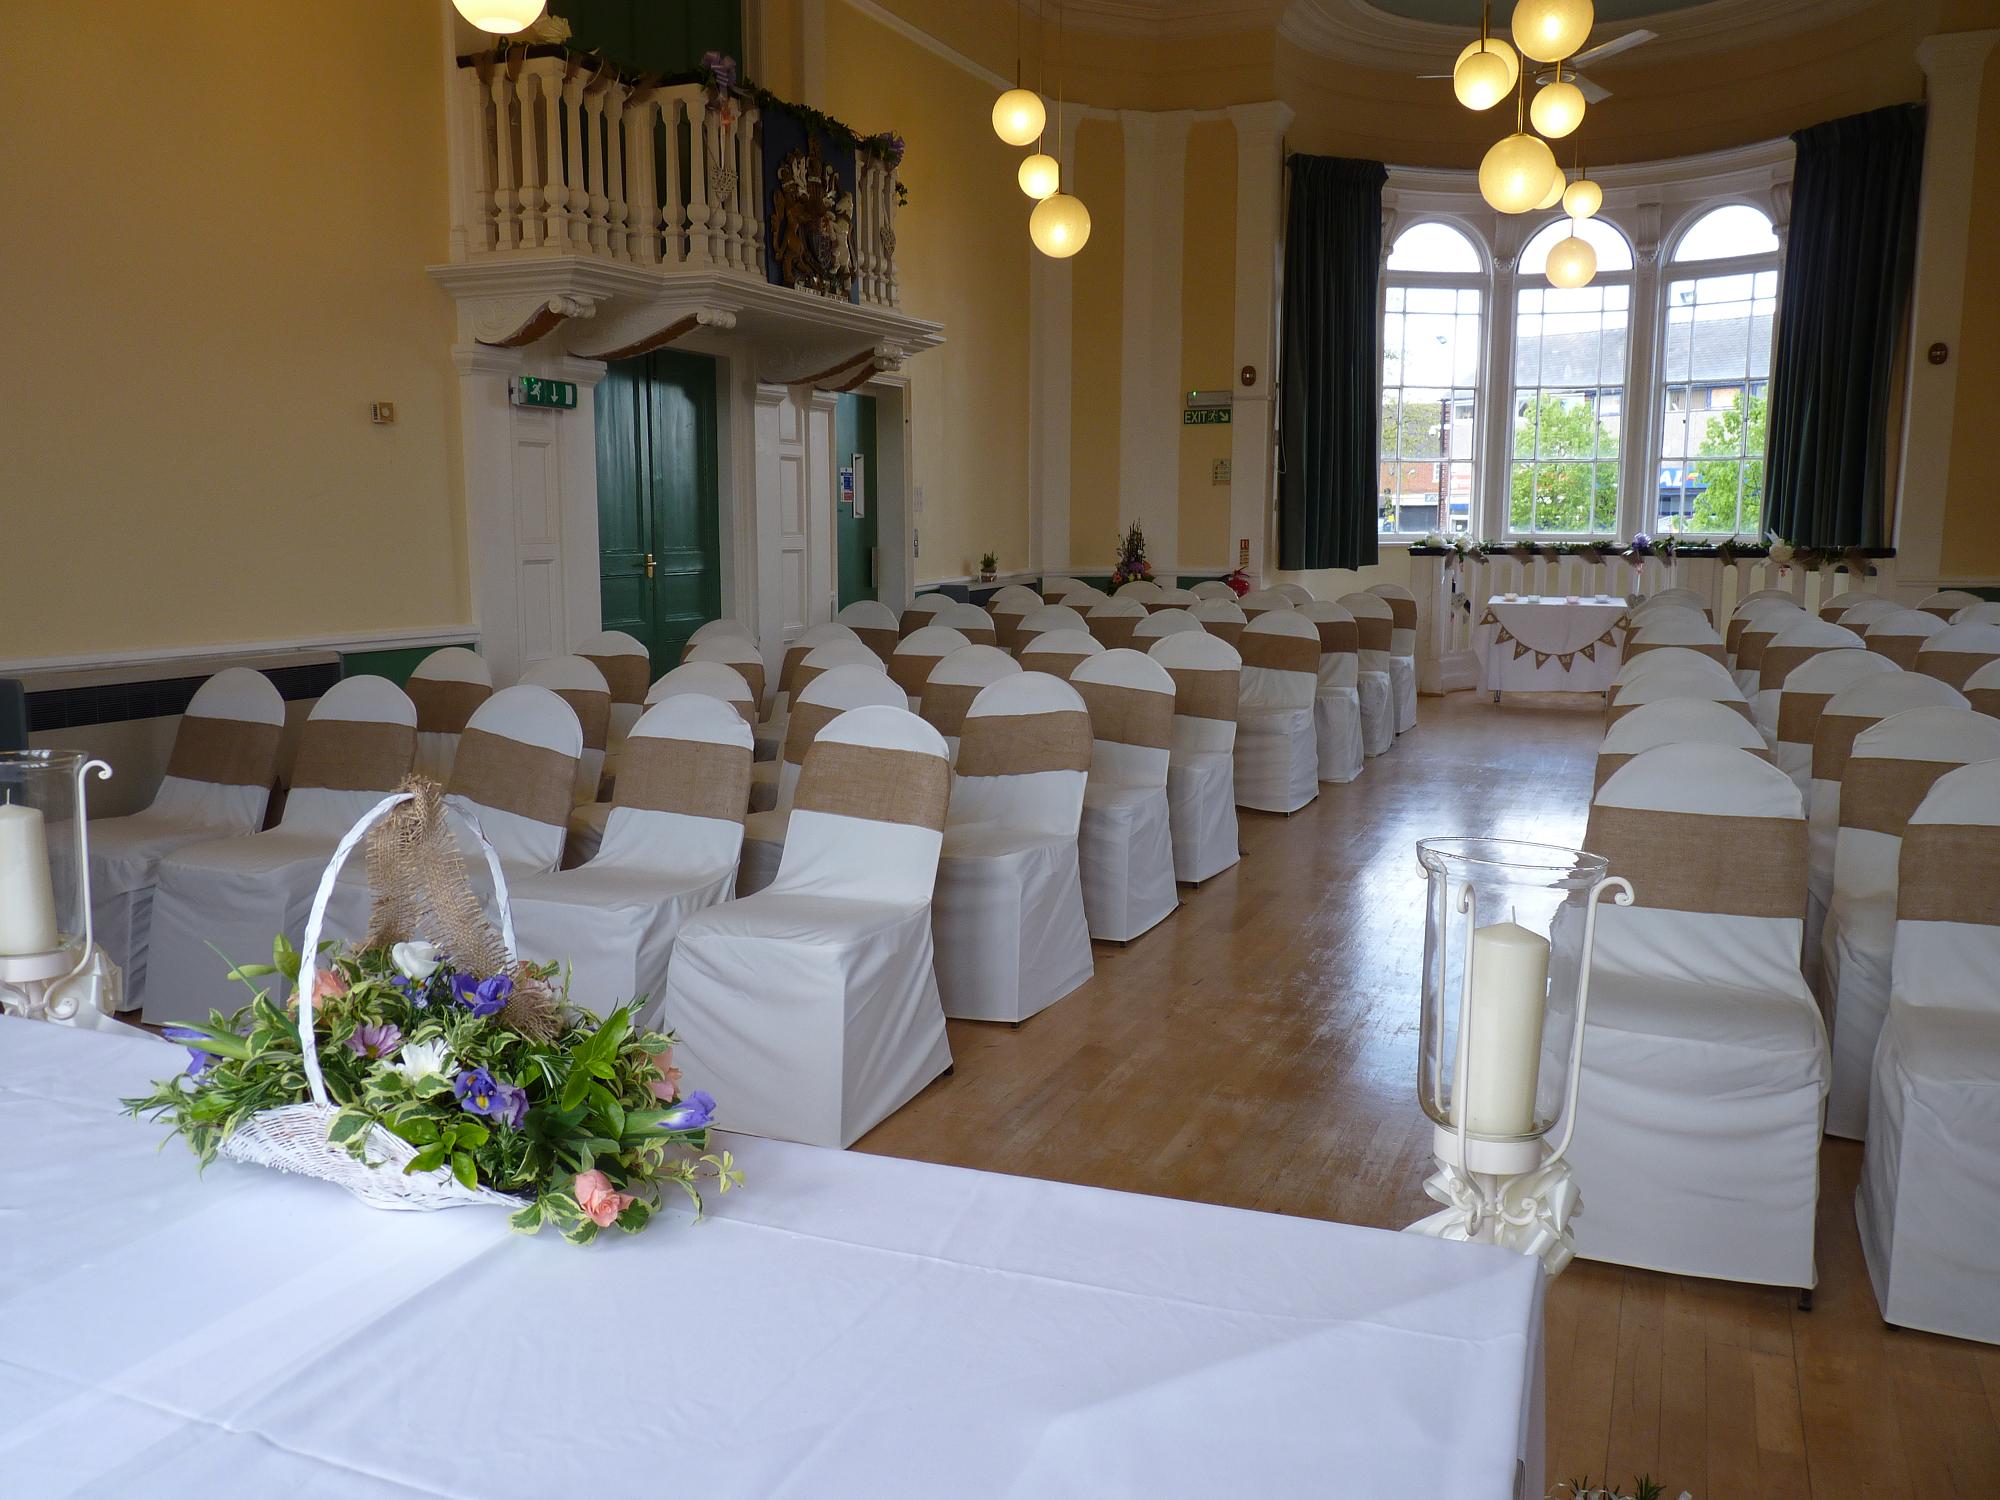 Lutterworth Town Hall wedding service with hessian bows on chairs